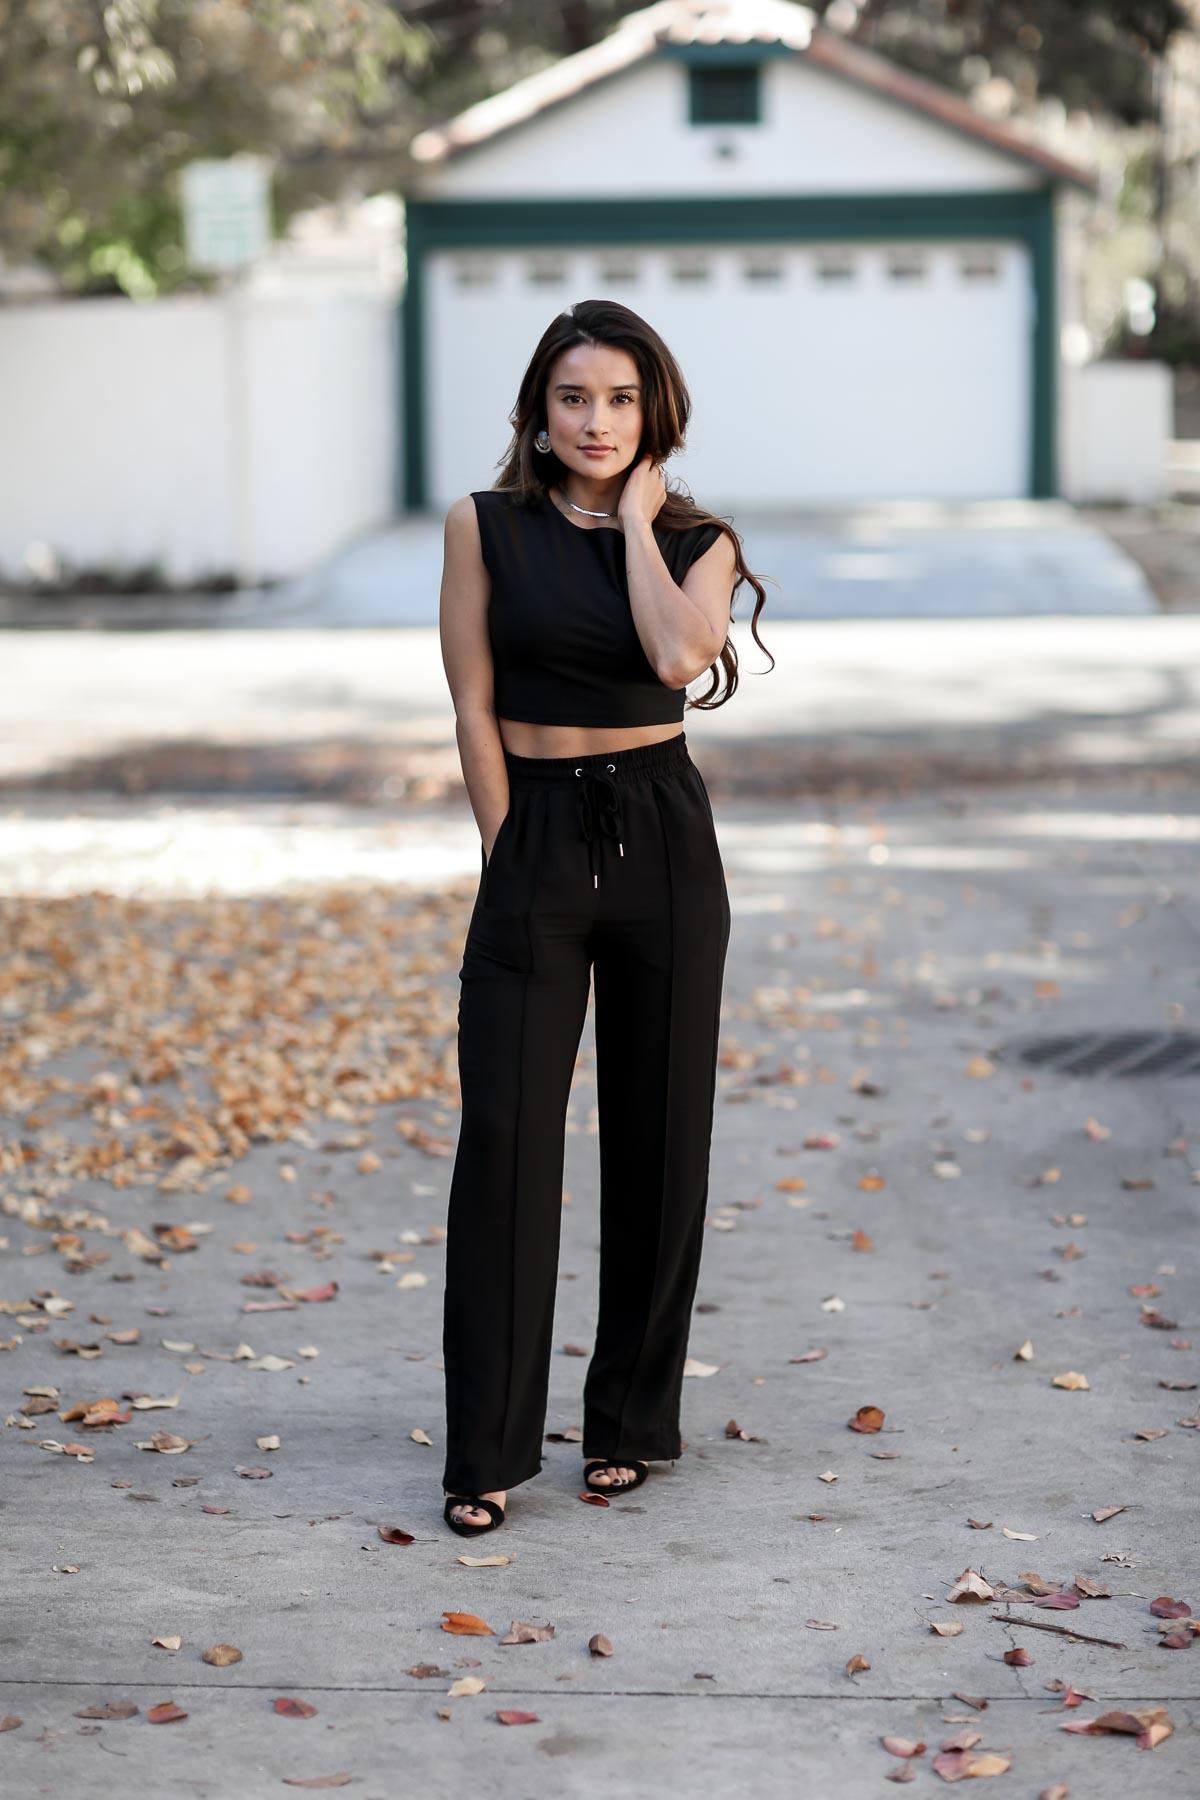 stiletto-confessions-hm-track-pants-forever21-bomber-61